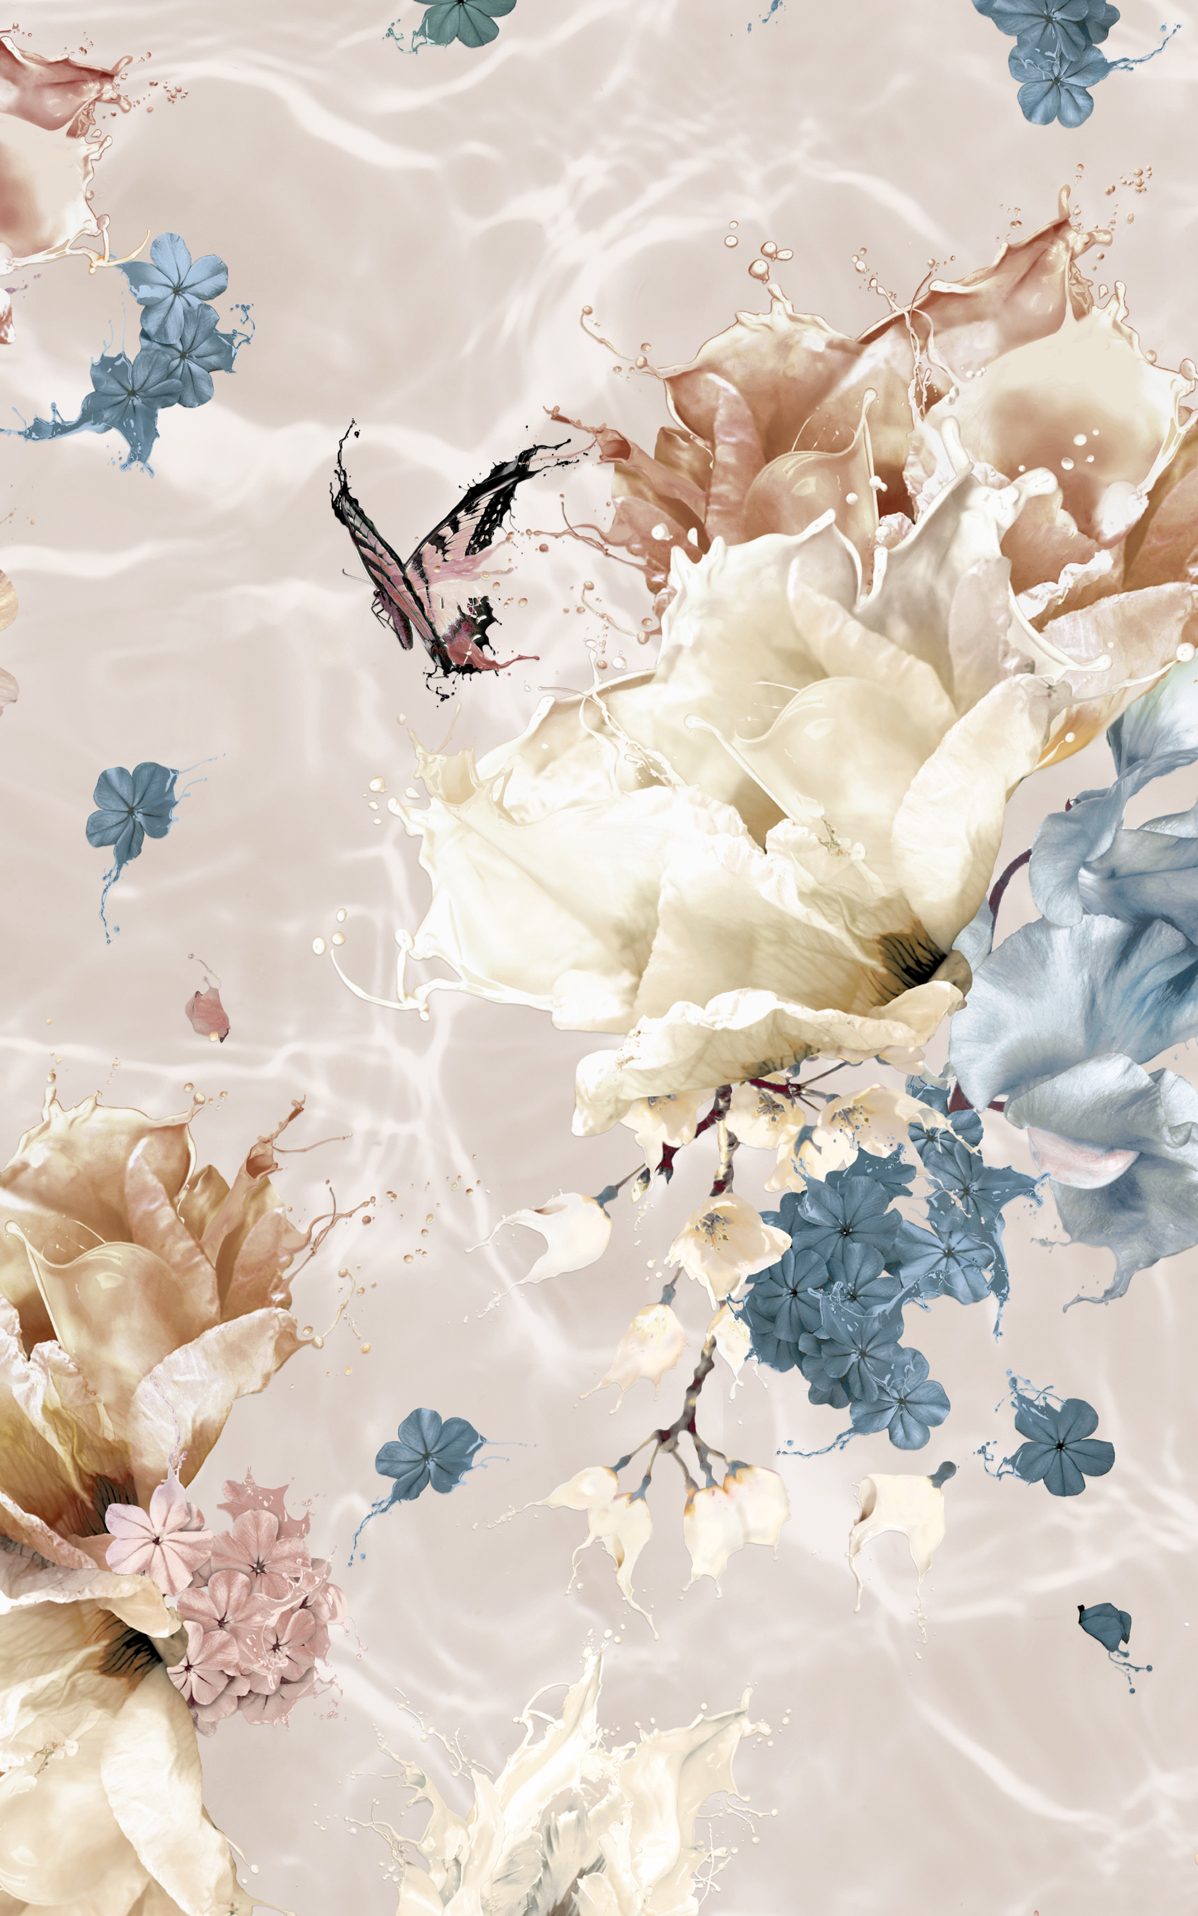 designer wallpaper with large scale flowers and butterflies